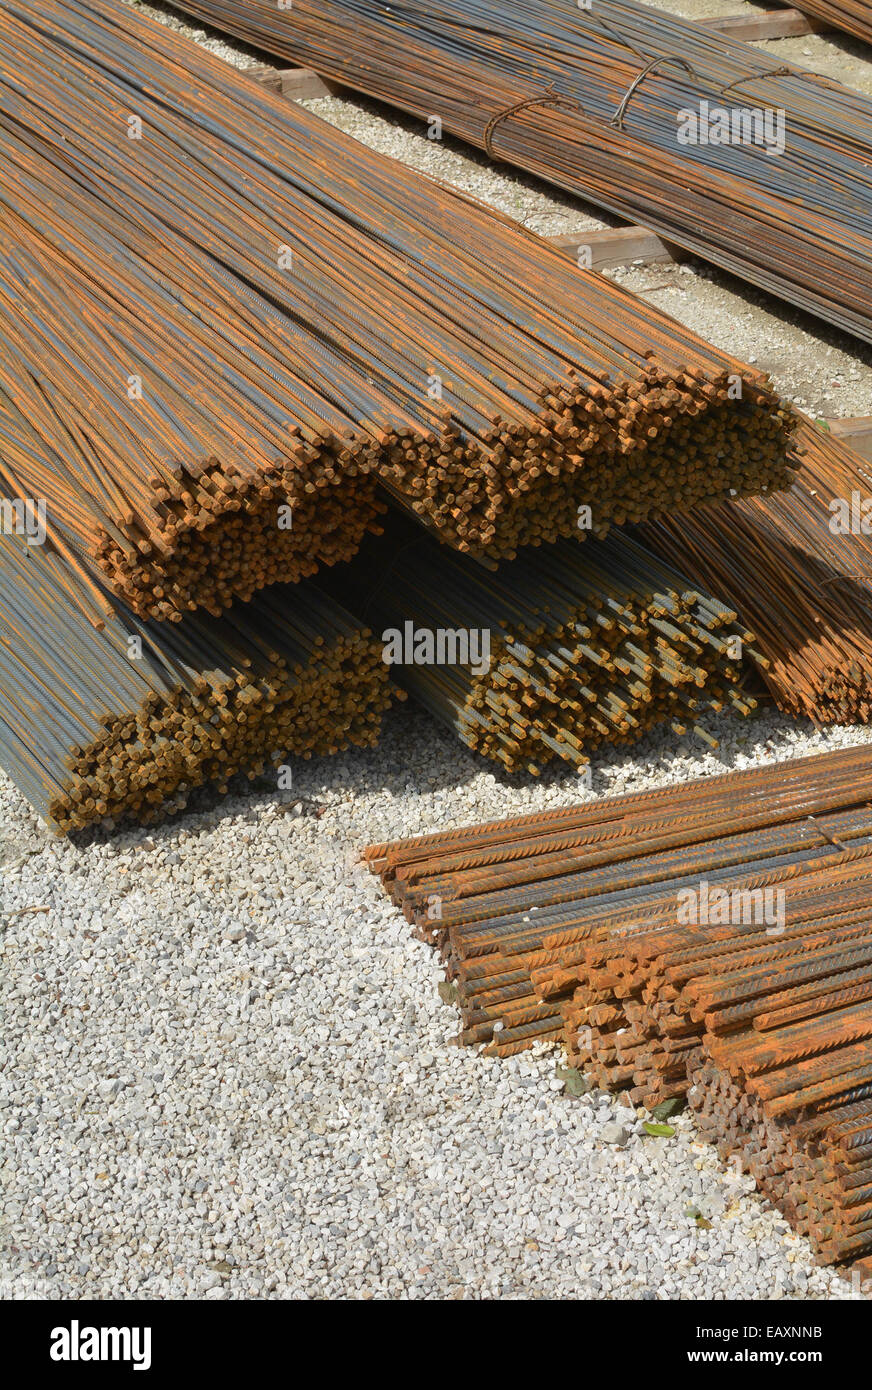 Steel rods for concrete constructions. Stock Photo